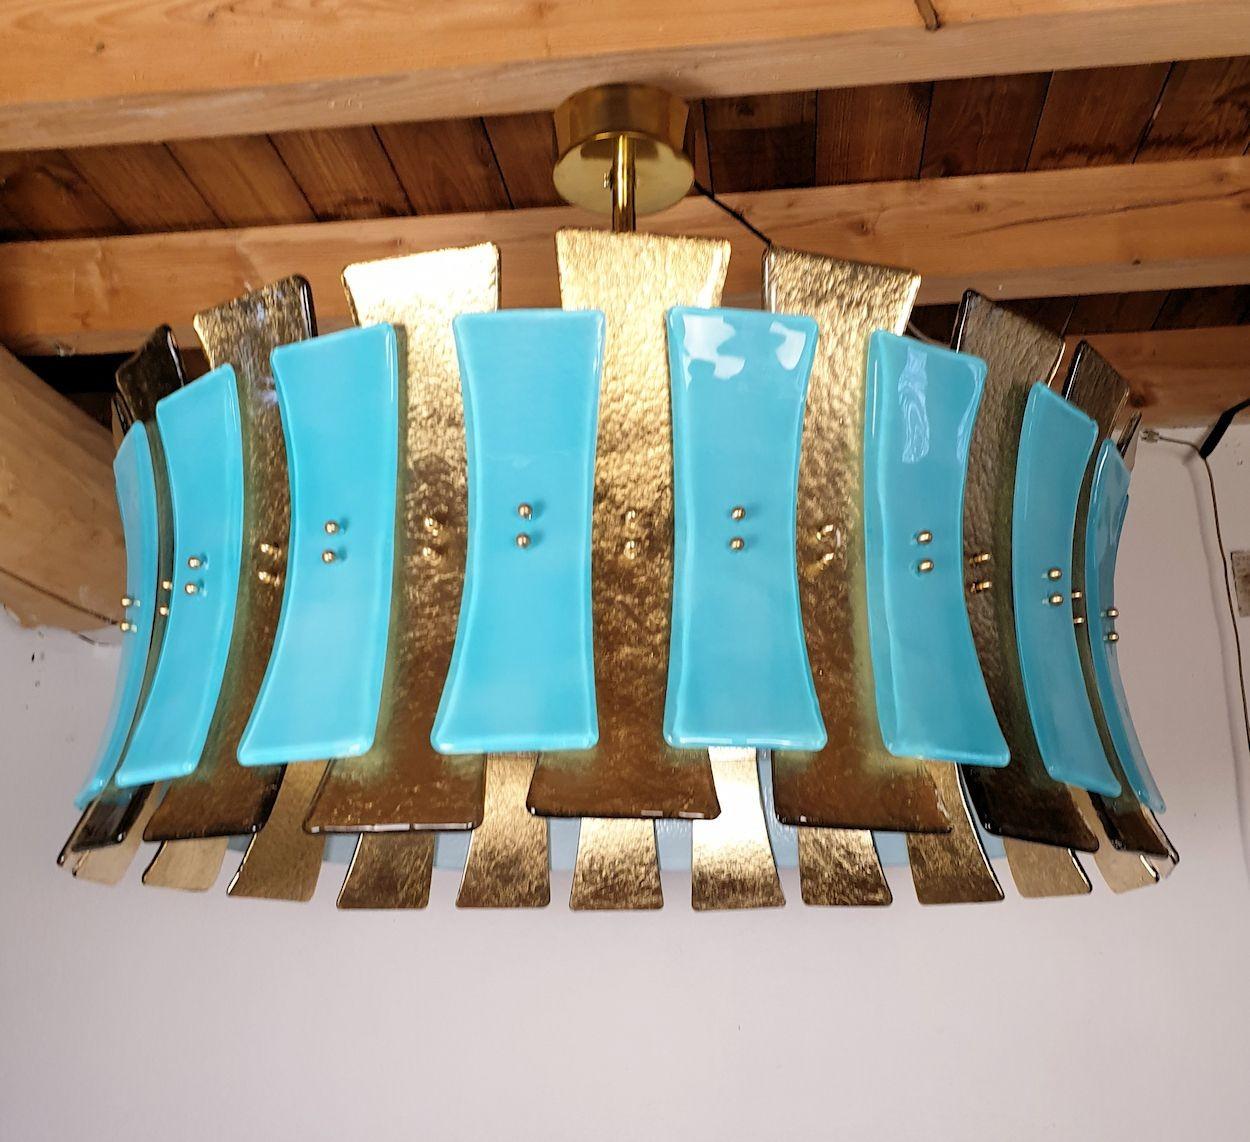 Large Blue & Gold Leaf Murano glass Drum chandelier, Mid Century Modern style, Italy circa 1990s
The large Italian chandelier is made of two layers of Murano glasses: turquoise blue over gold leaf glasses.
The bottom of the drum chandelier is a